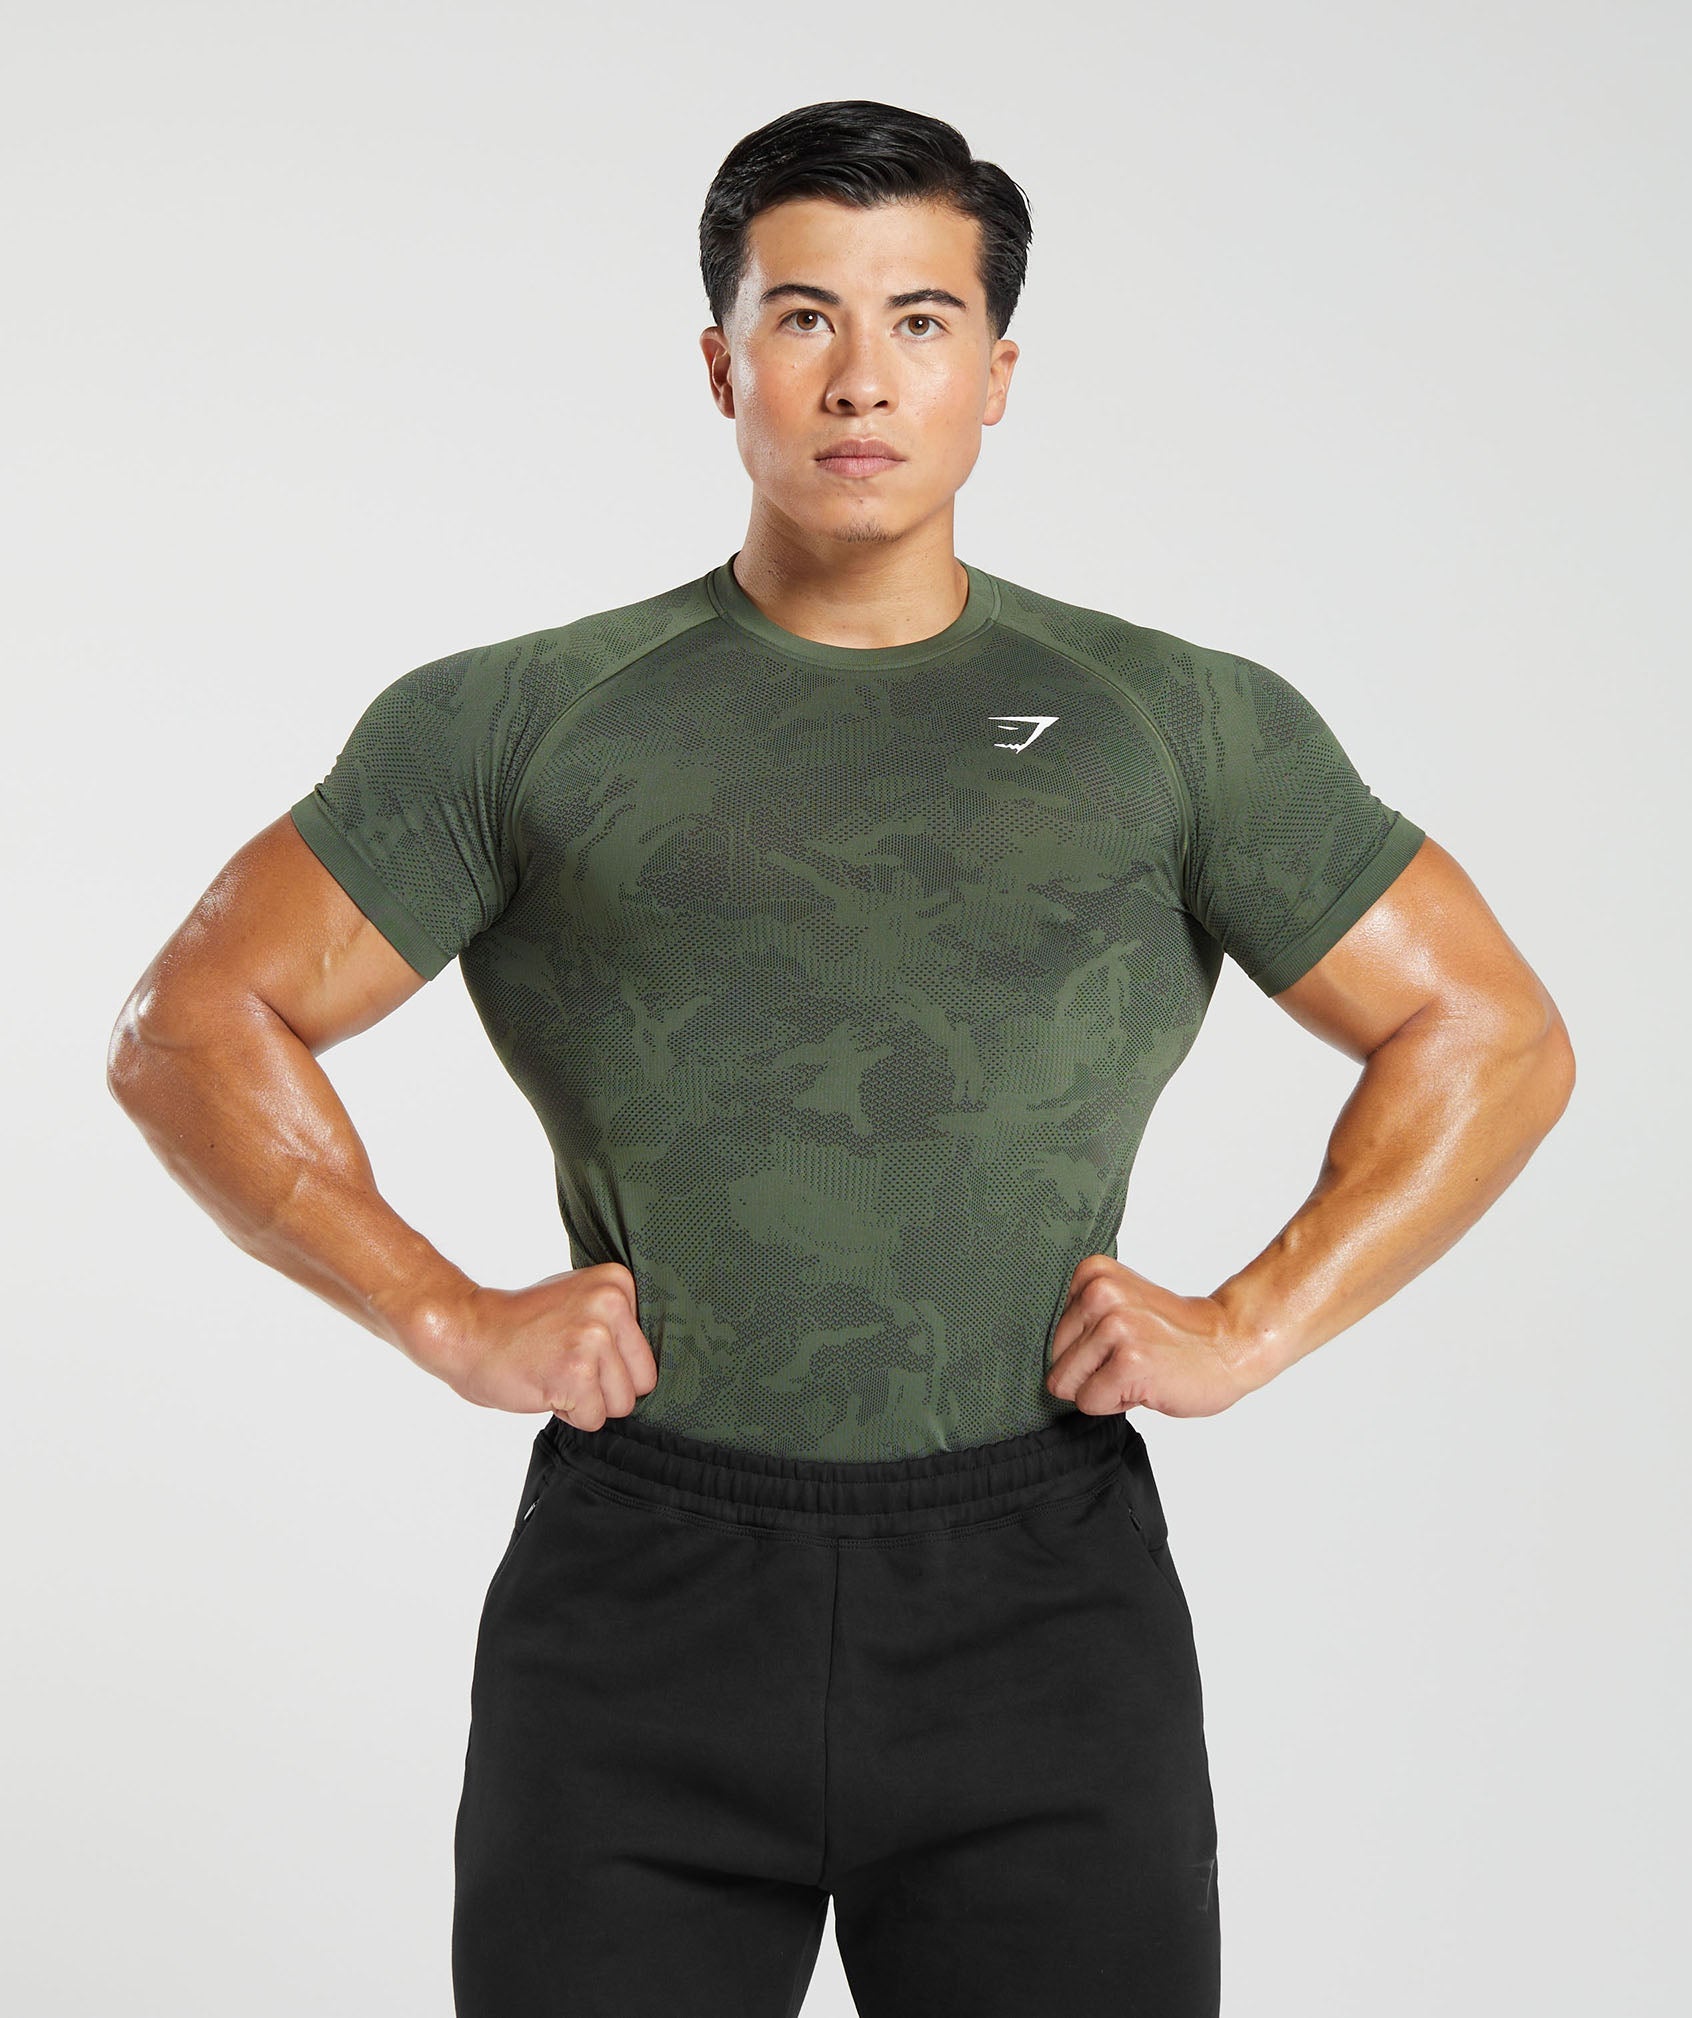 Geo Seamless T-Shirt in Core Olive/Black